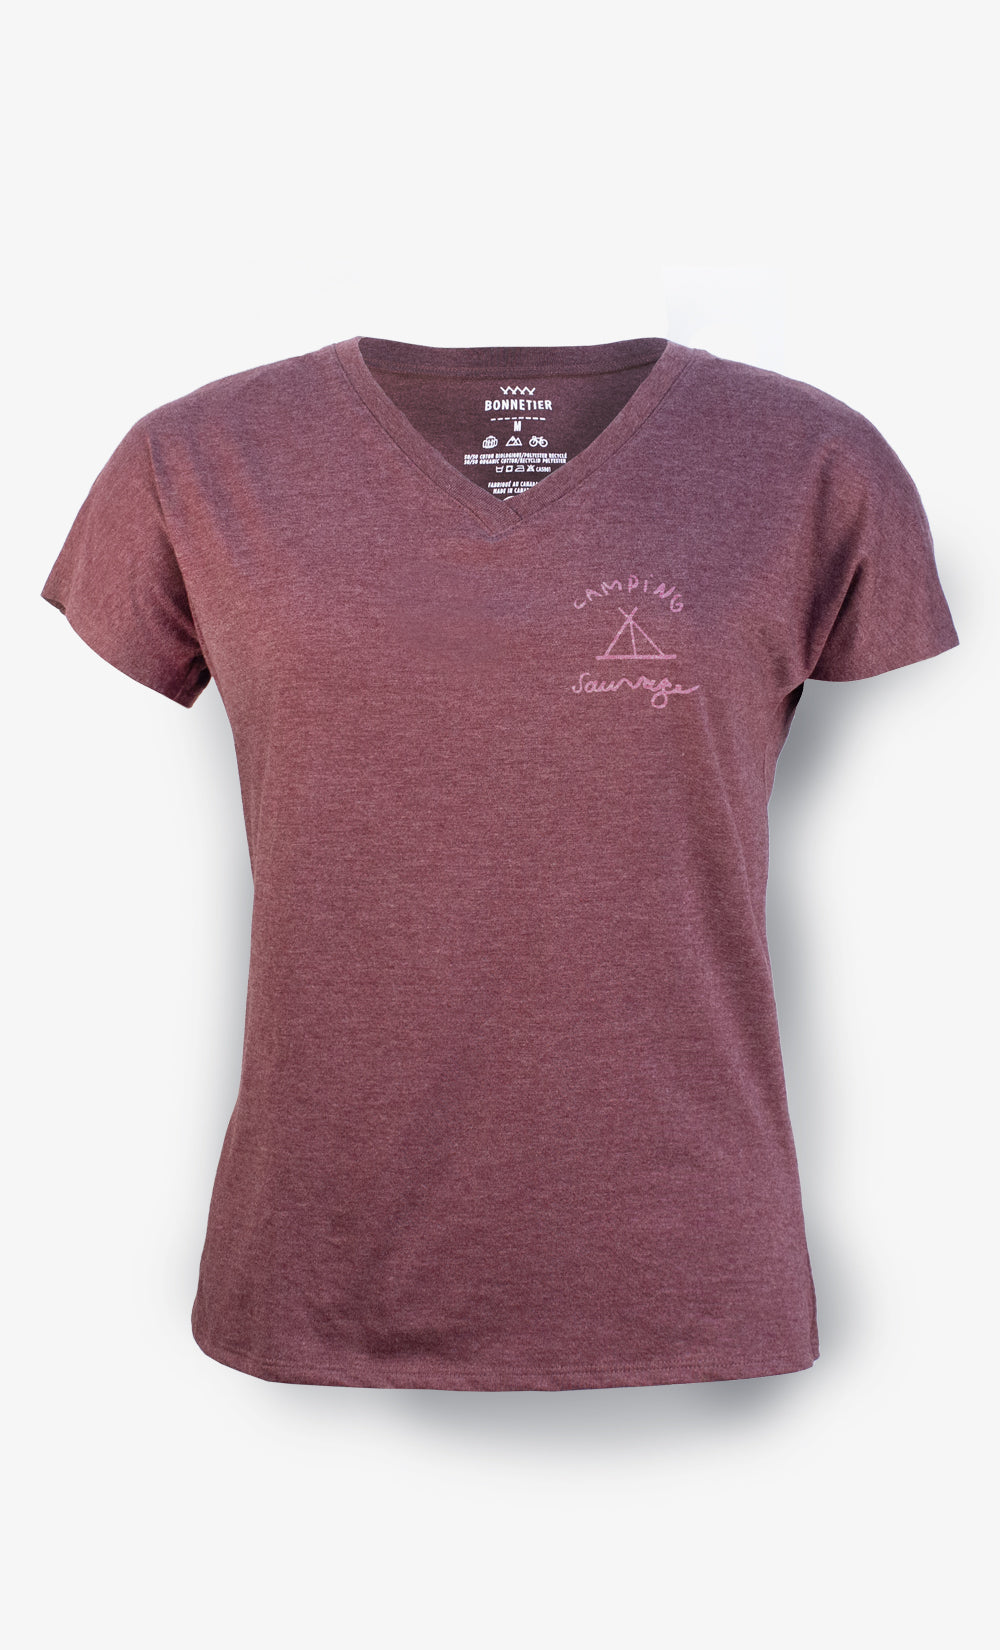 T-Shirt Femme Pourpre - Camping sauvage